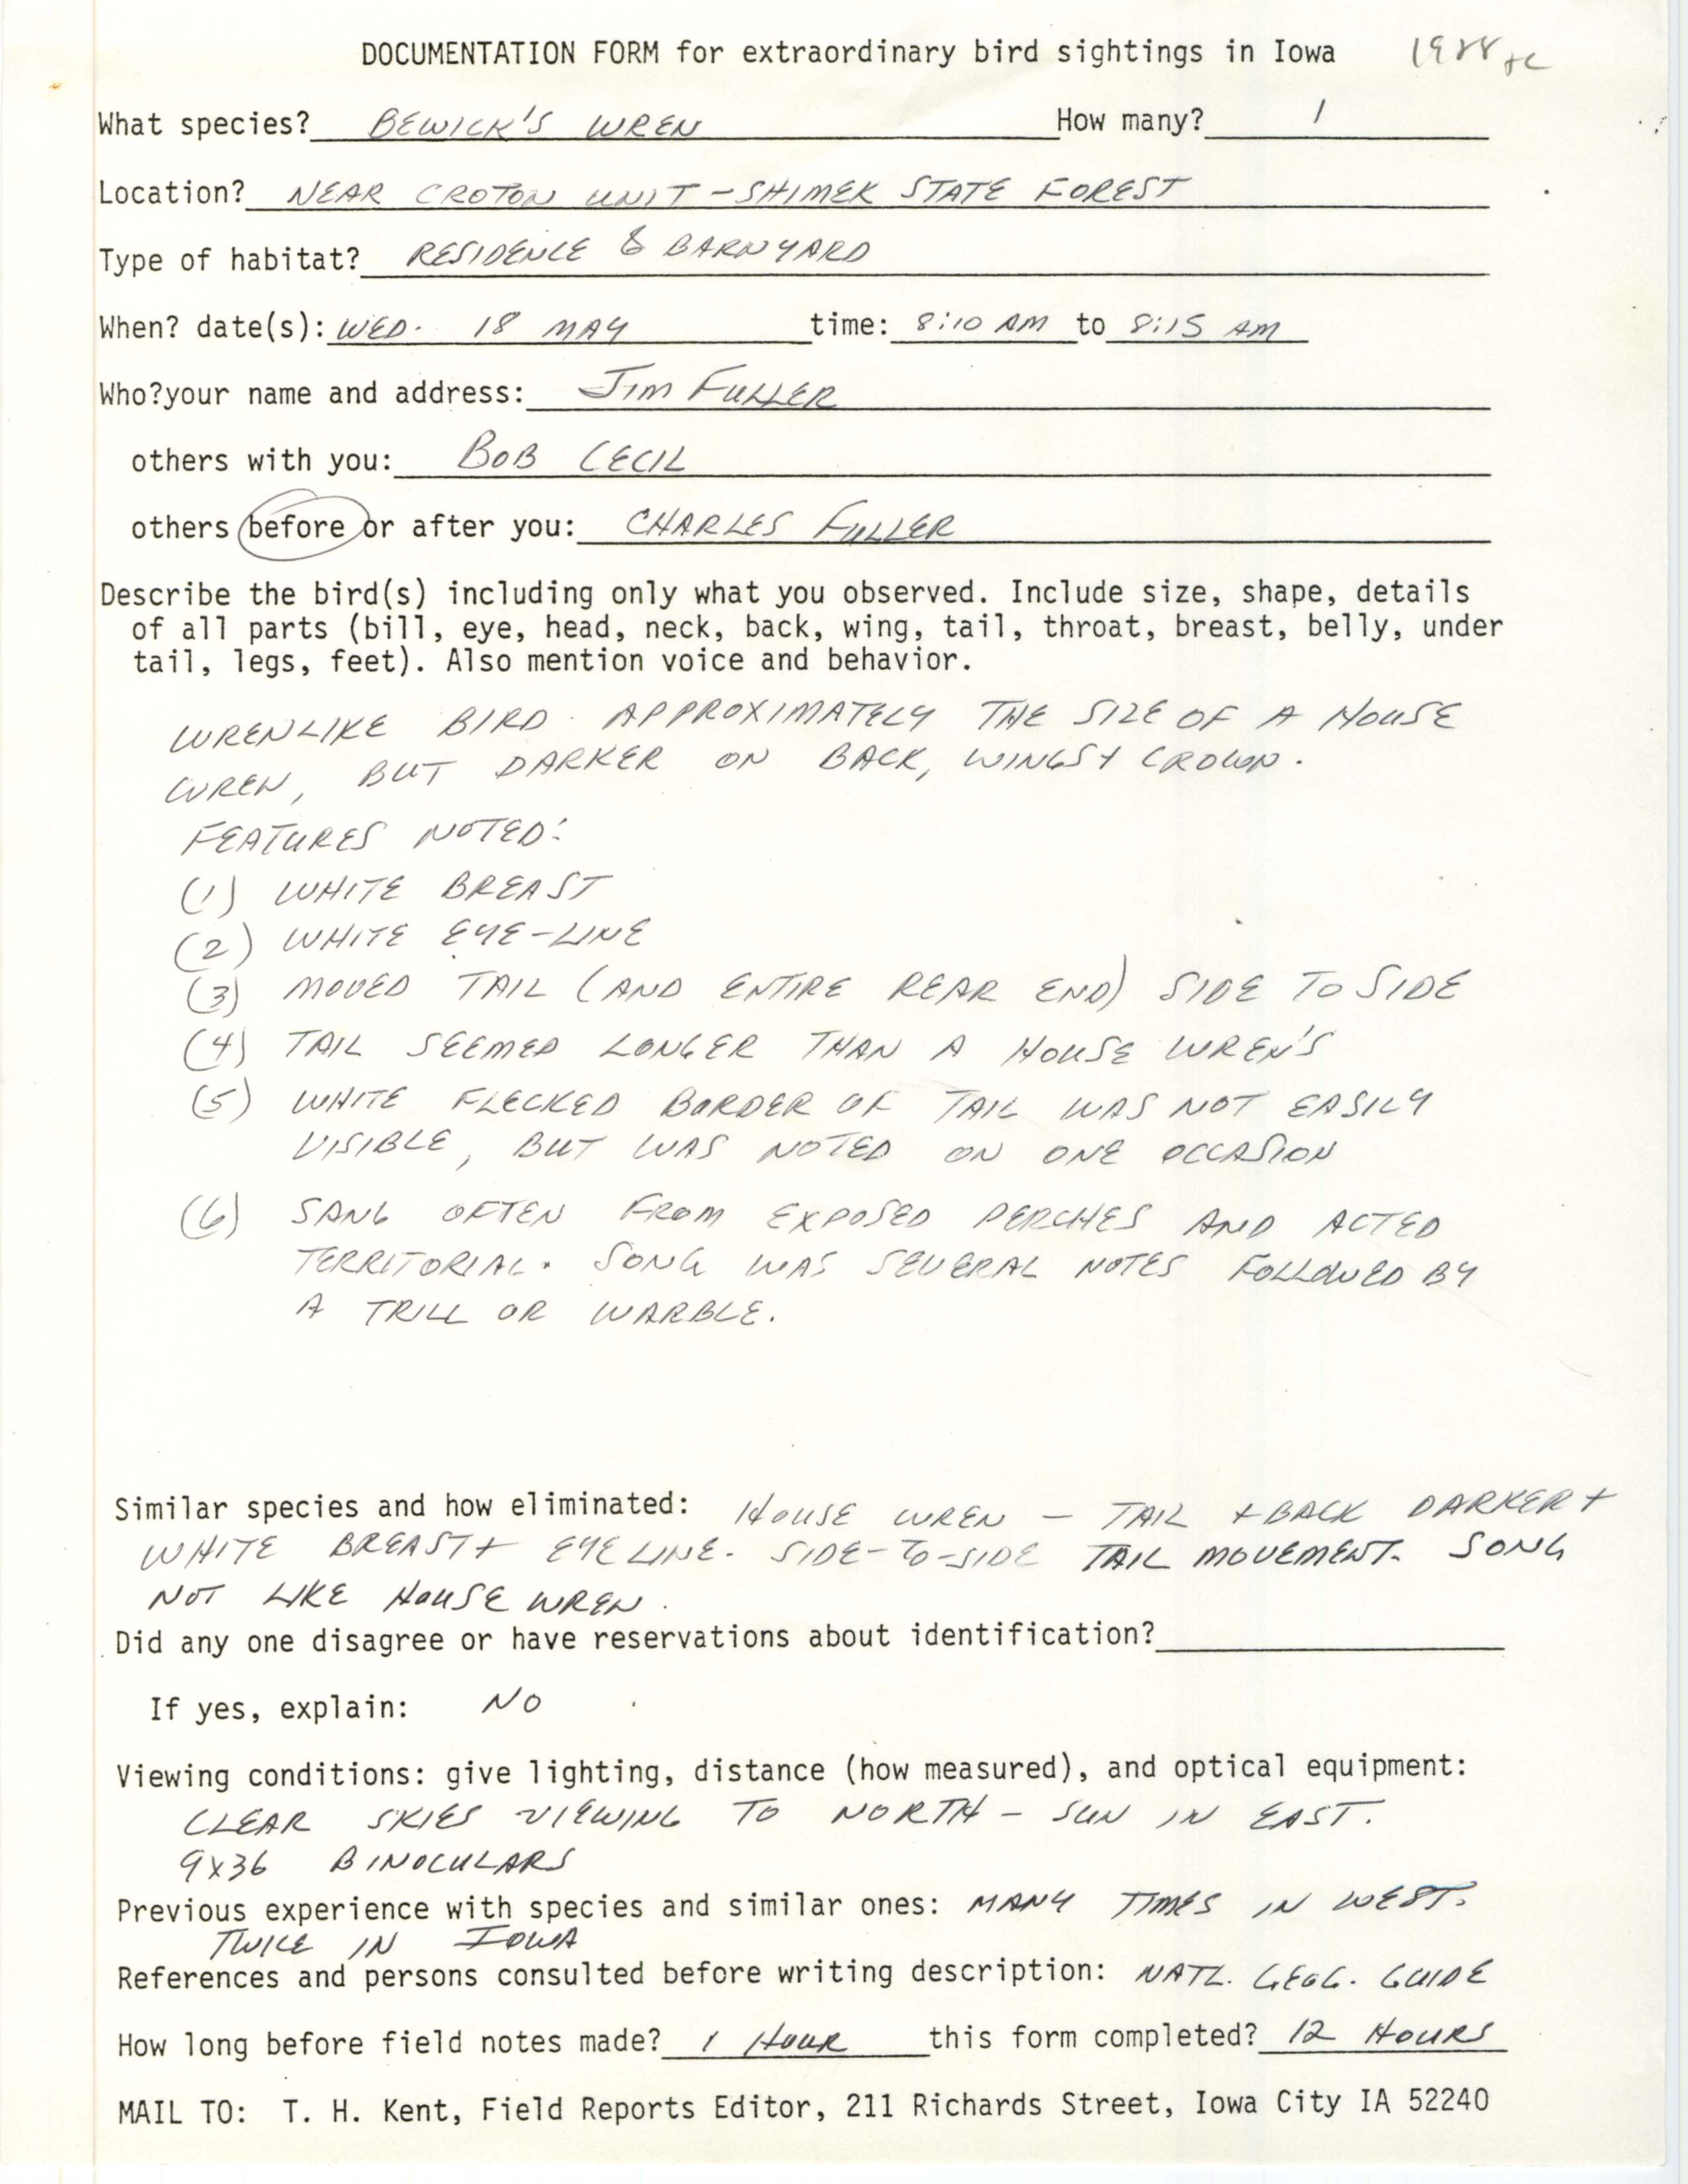 Rare bird documentation form for Bewick's Wren near the Croton Unit in Shimek State Forest, 1988